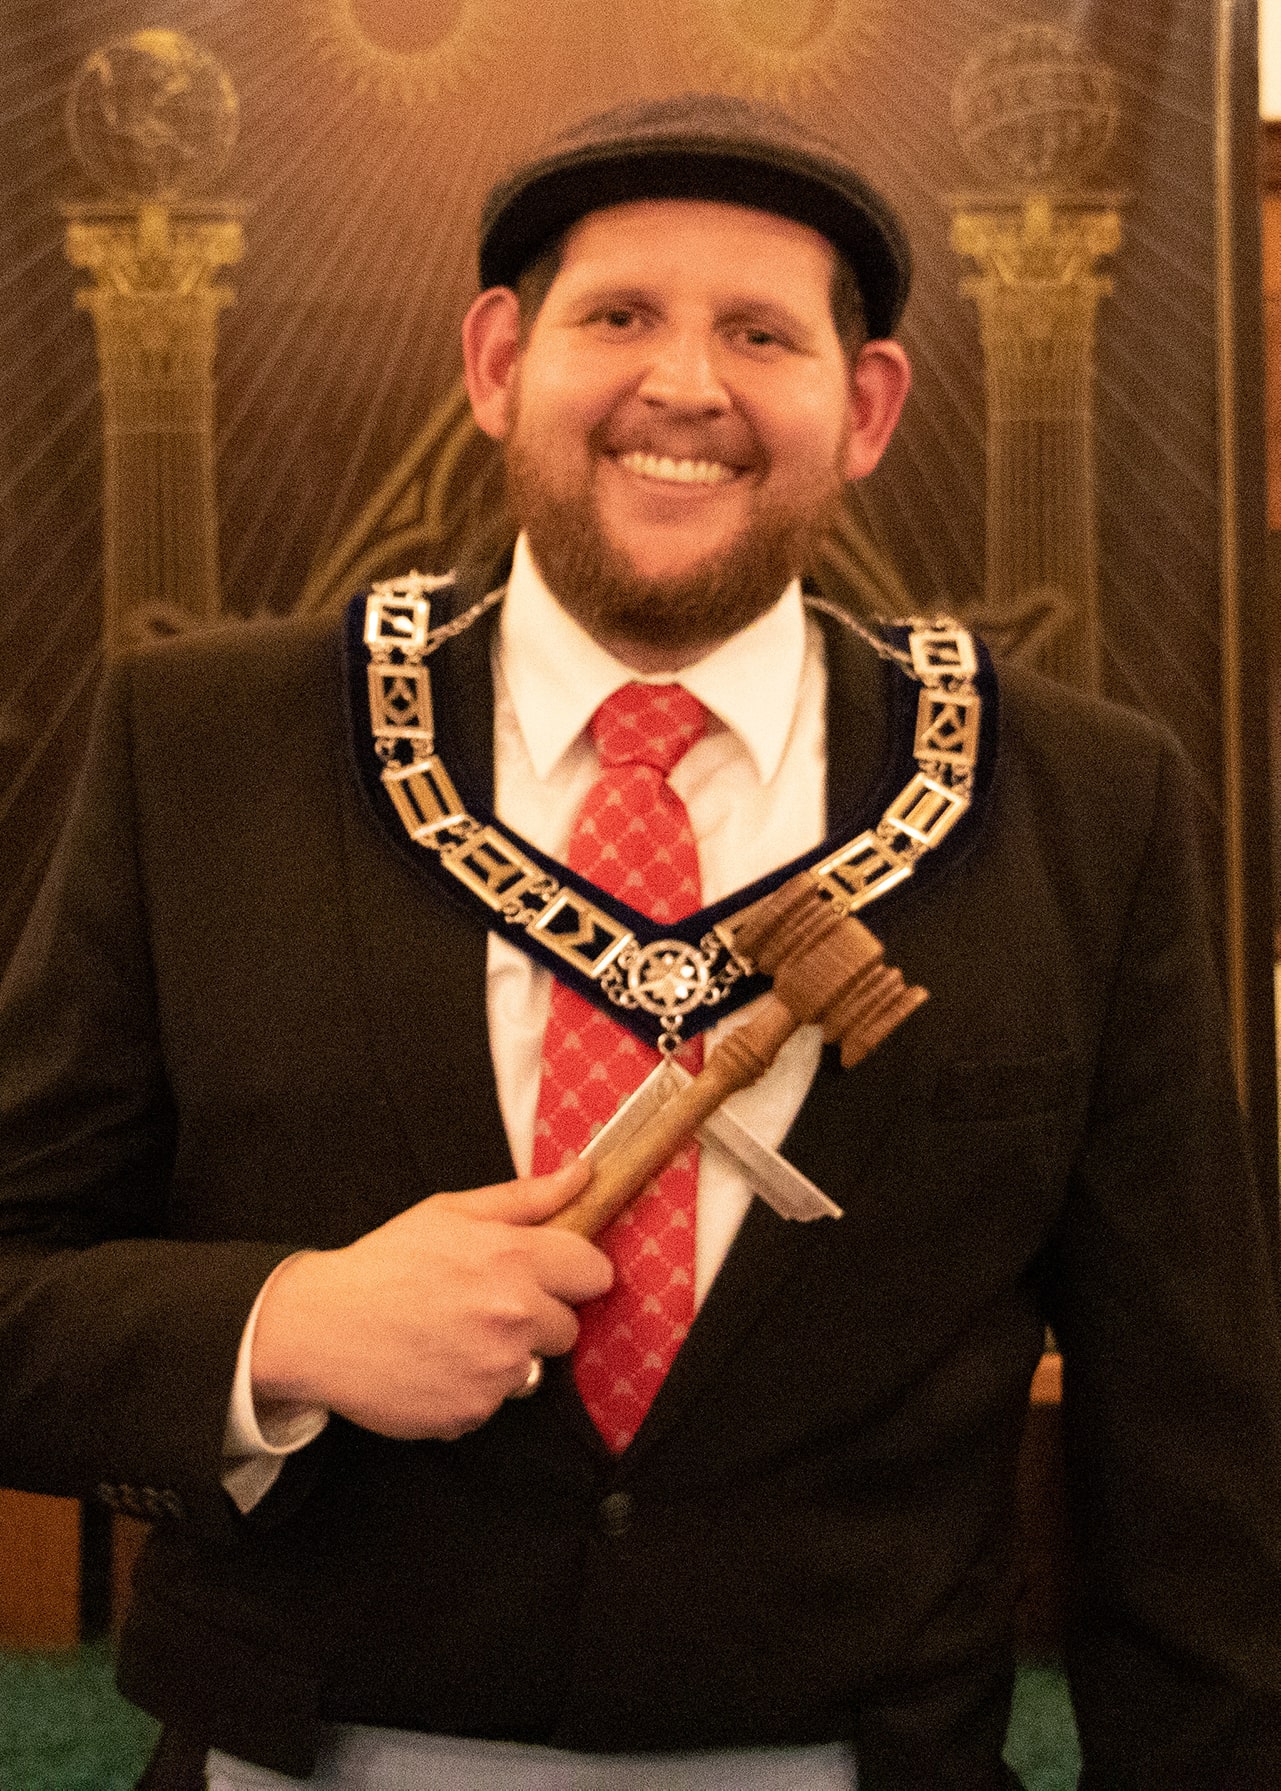 Josh Graves - Worshipful Master of Story Lodge for 2022